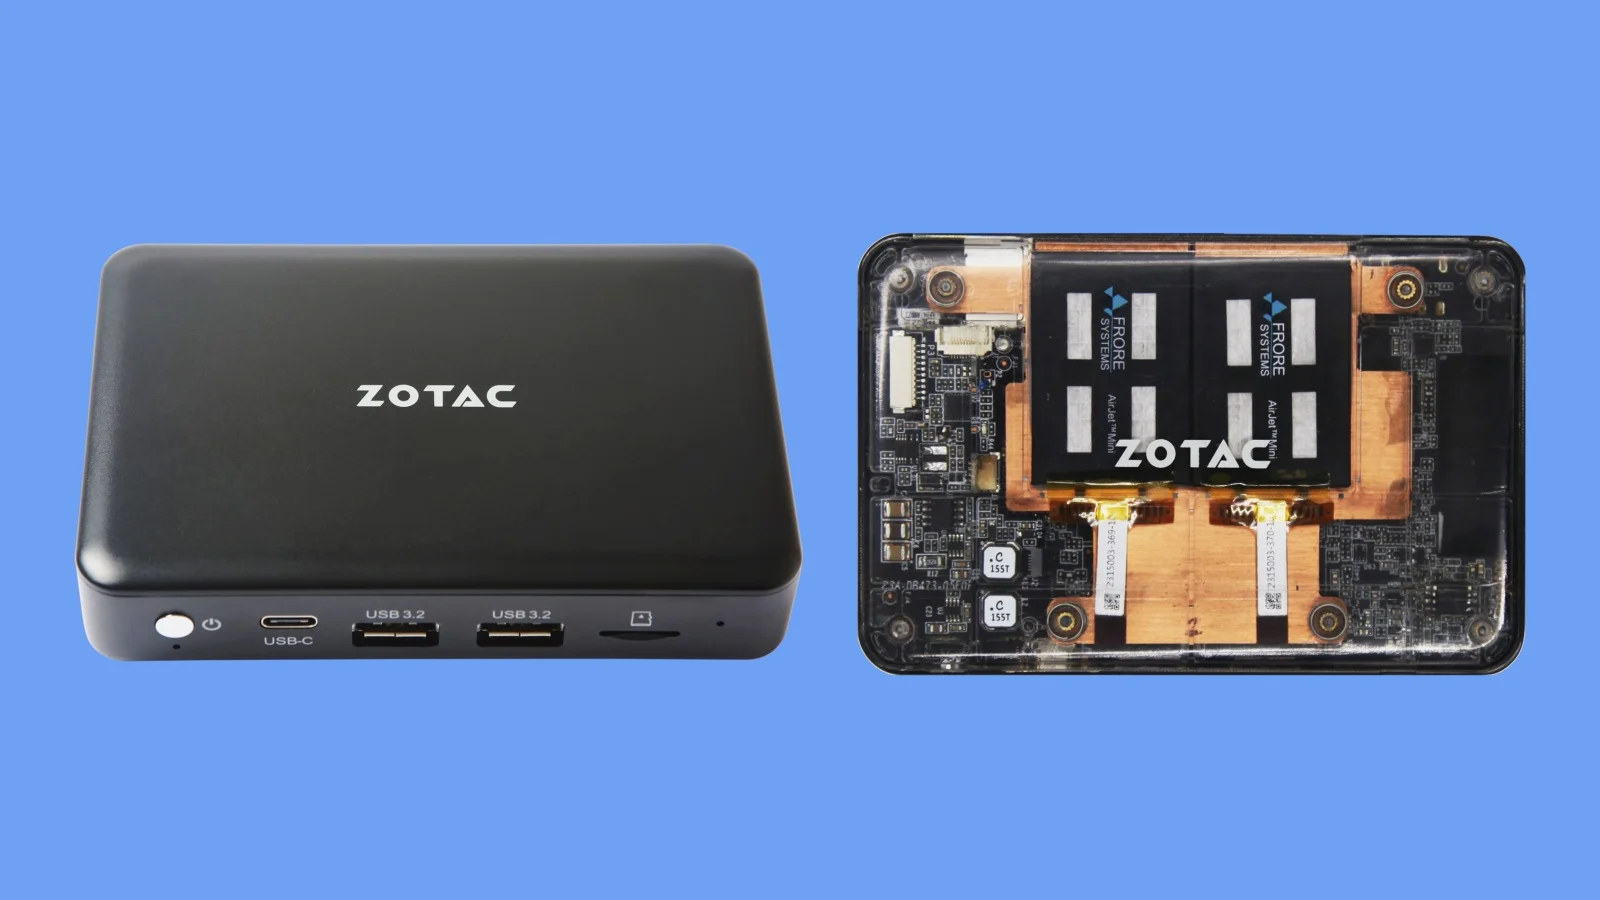 ZOTAC PC Desktops & All-In-One Computers for sale